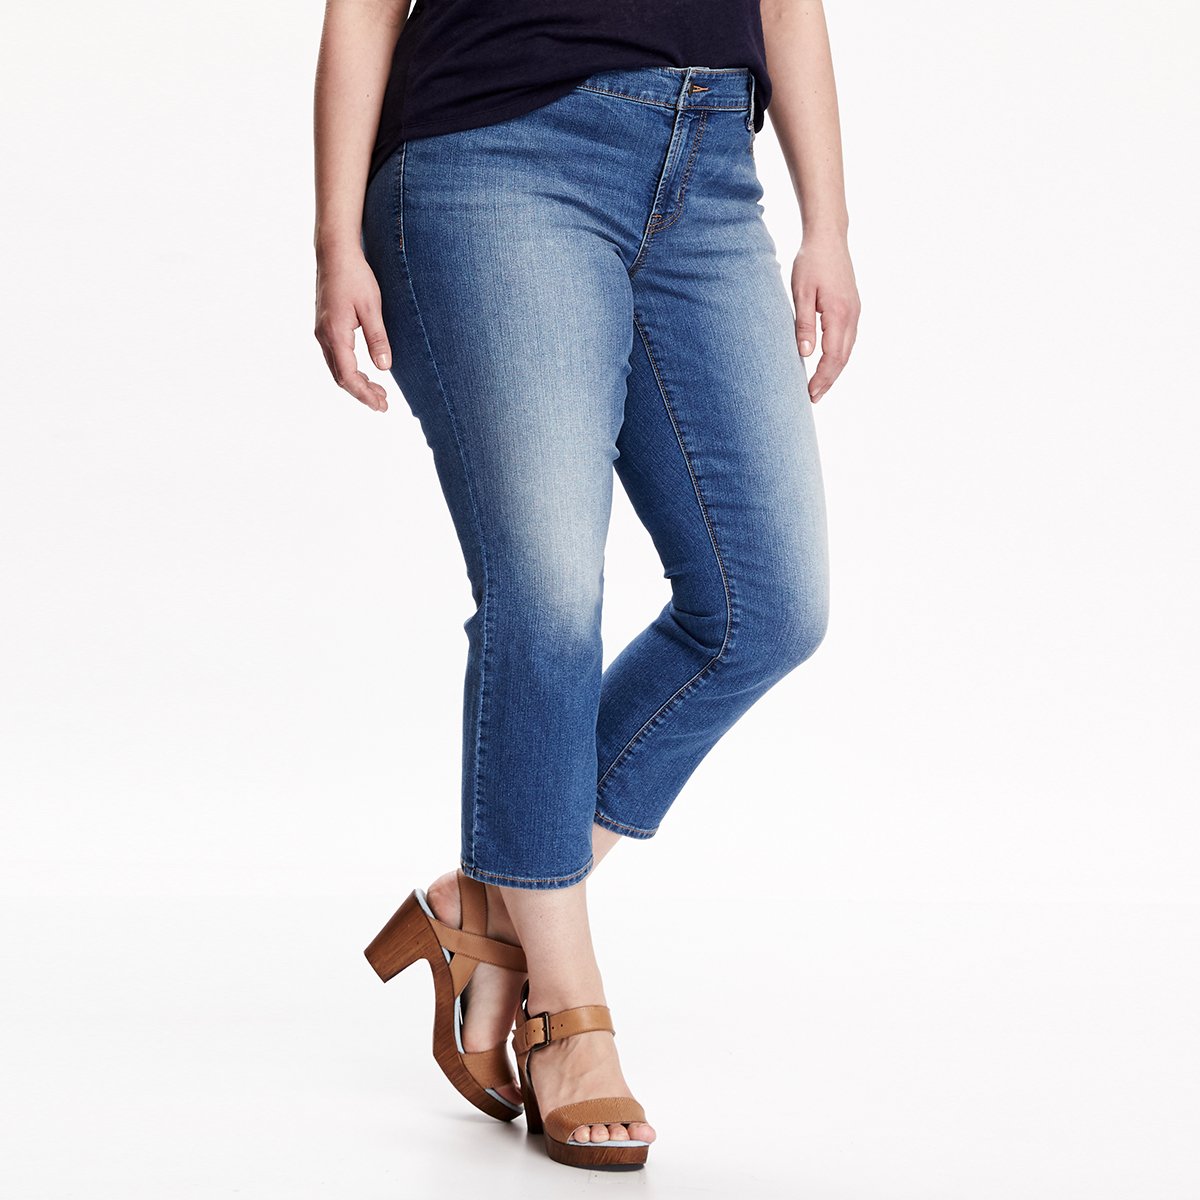 9 New Look Womens Cropped Jeans | Styles At Life